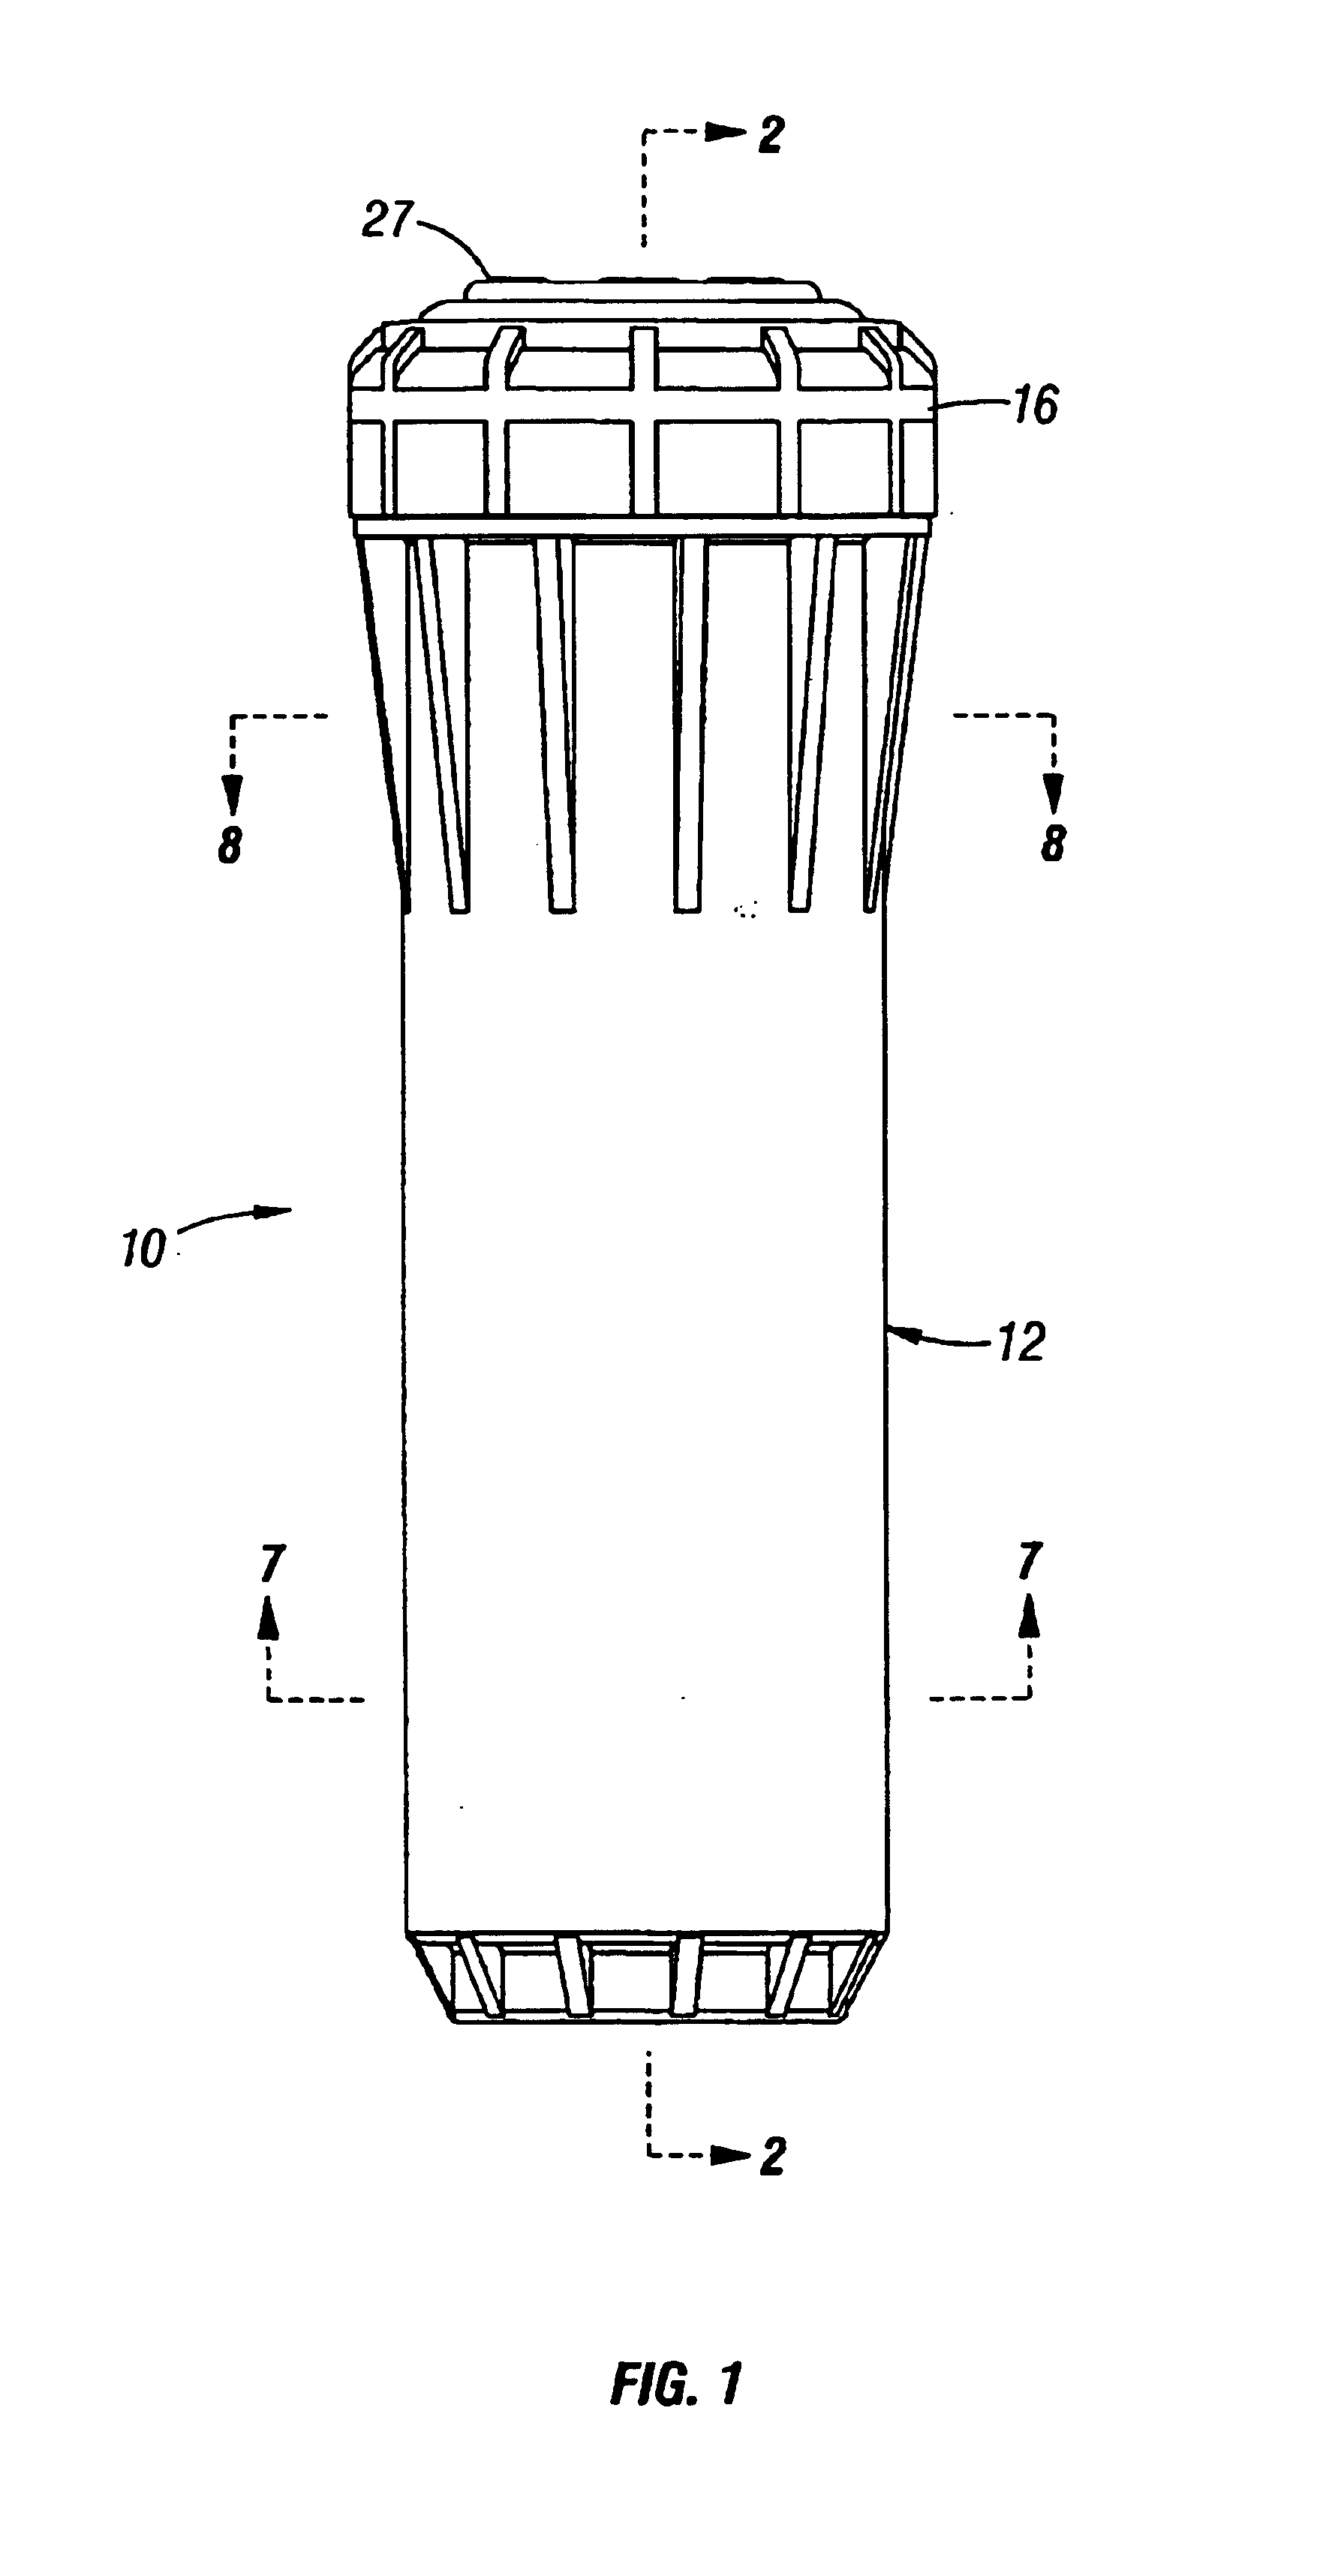 Rotor type sprinkler with insertable drive subassembly including horizontal turbine and reversing mechanism